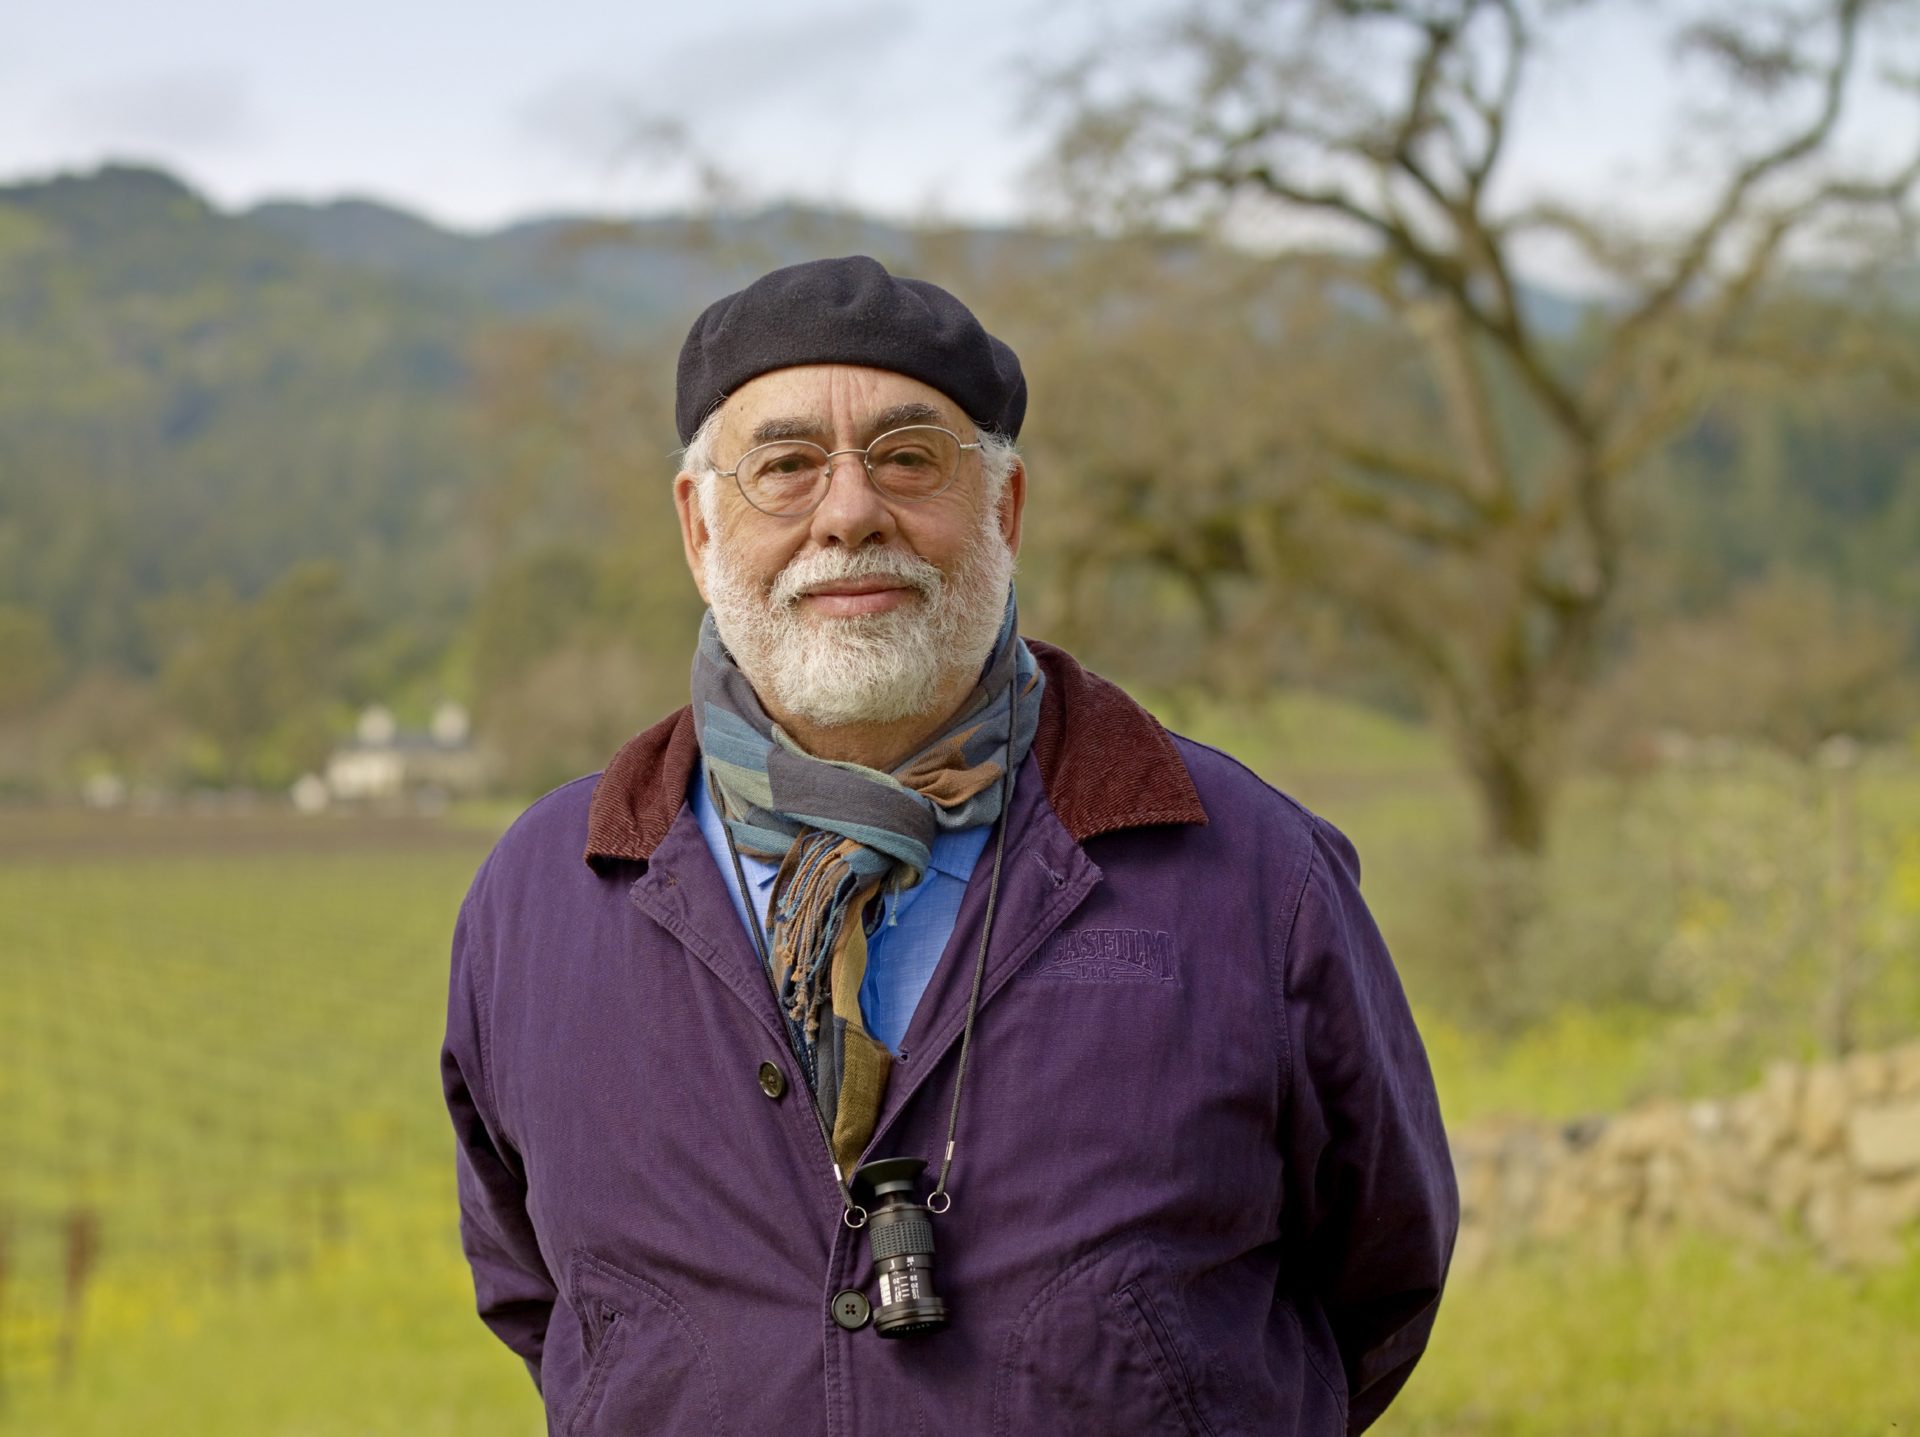 Francis Ford Coppola finds his indie spirit – Orange County Register